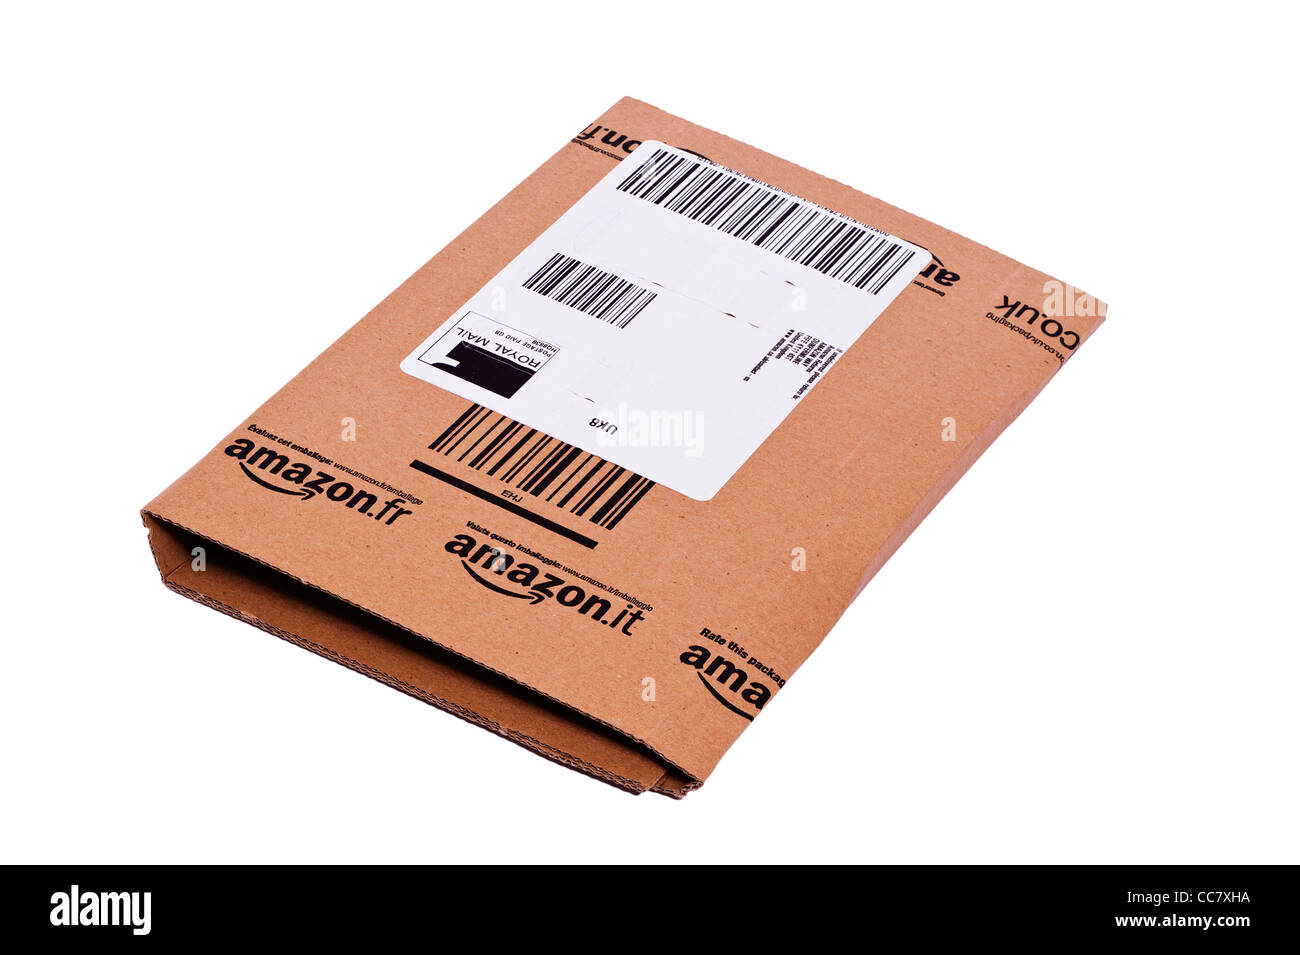 A packet parcel from Amazon online shopping delivered by Royal Mail on a white background Stock Photo